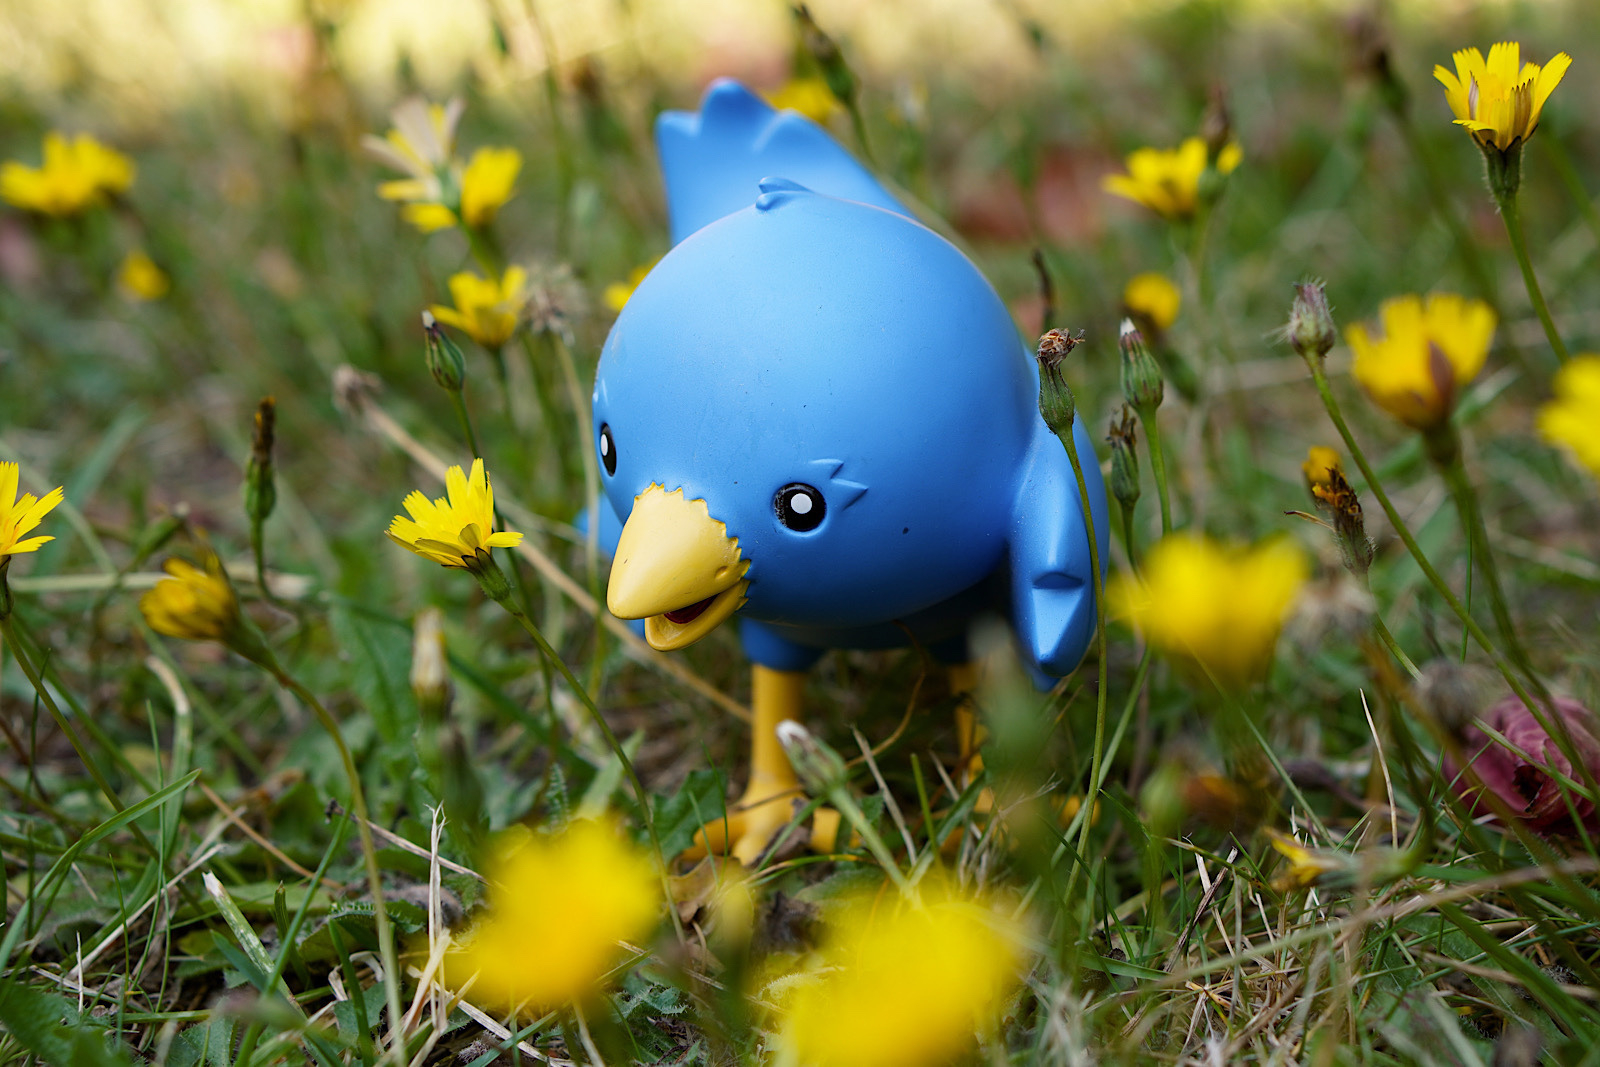 The Twitteriffic bird, Ollie, stands in a field of dandelions